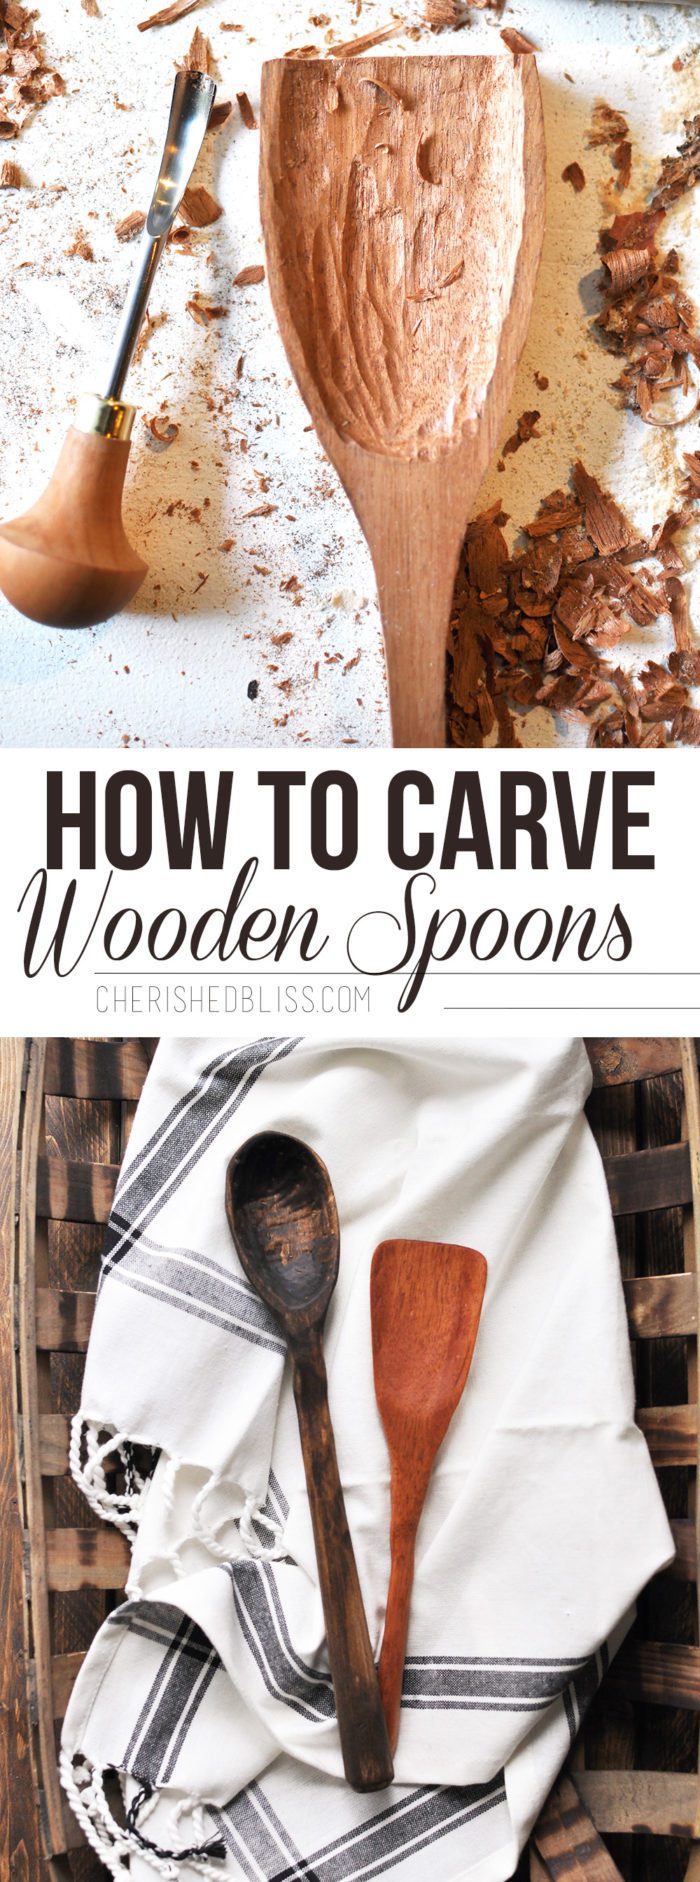 Create a meaningful and memorable gift for your loved ones with this easy to follow tutorial on how to Carve Wooden Spoons!